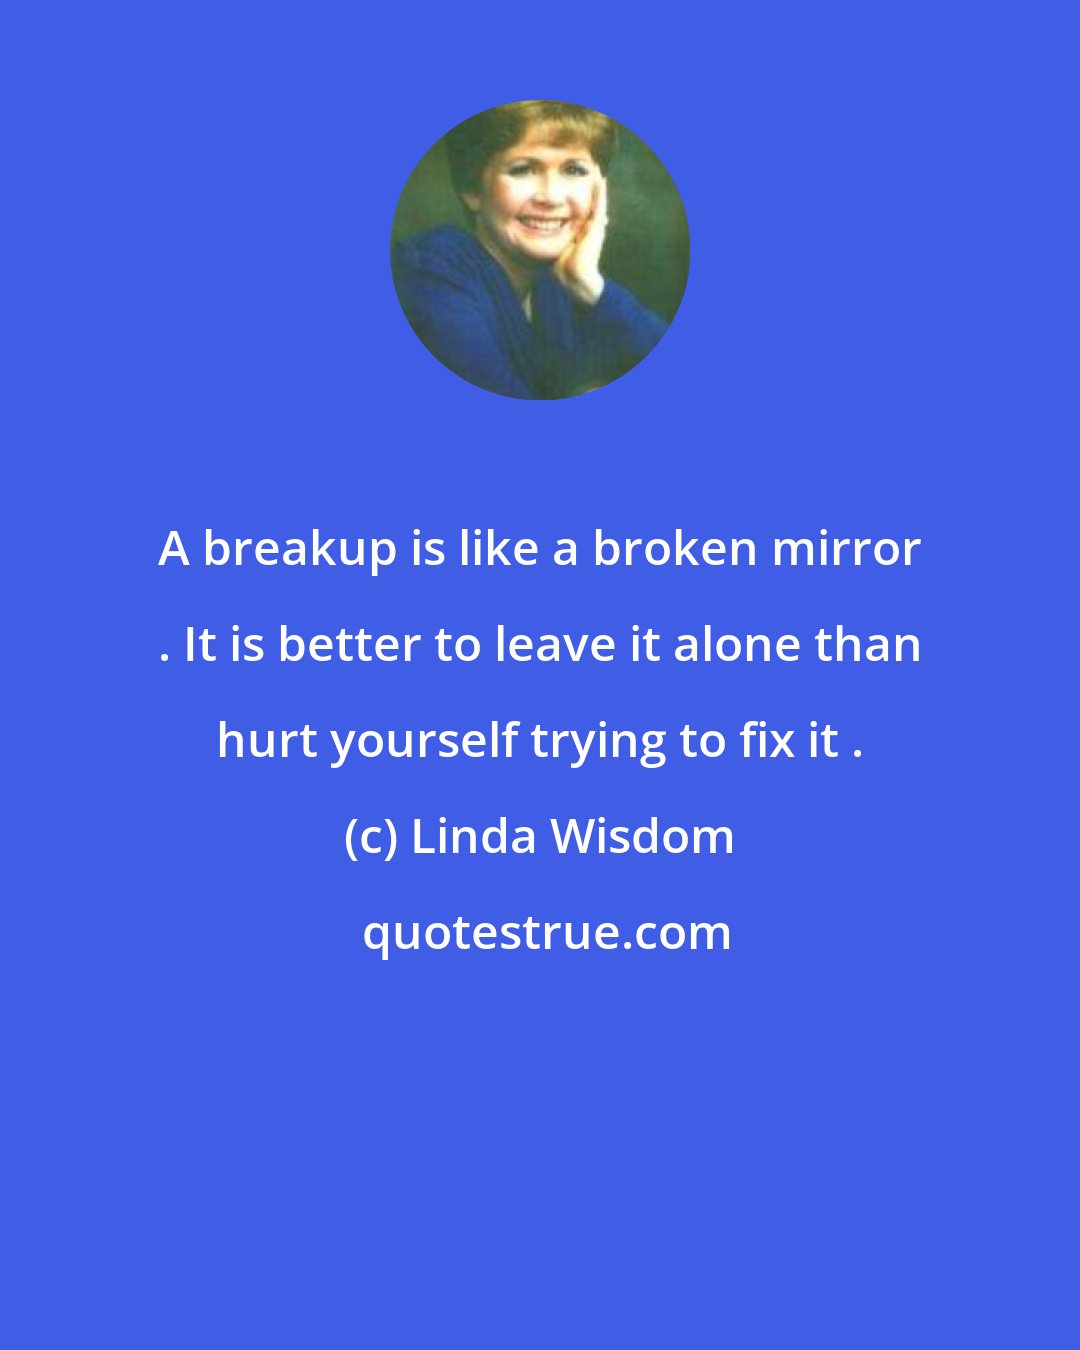 Linda Wisdom: A breakup is like a broken mirror . It is better to leave it alone than hurt yourself trying to fix it .